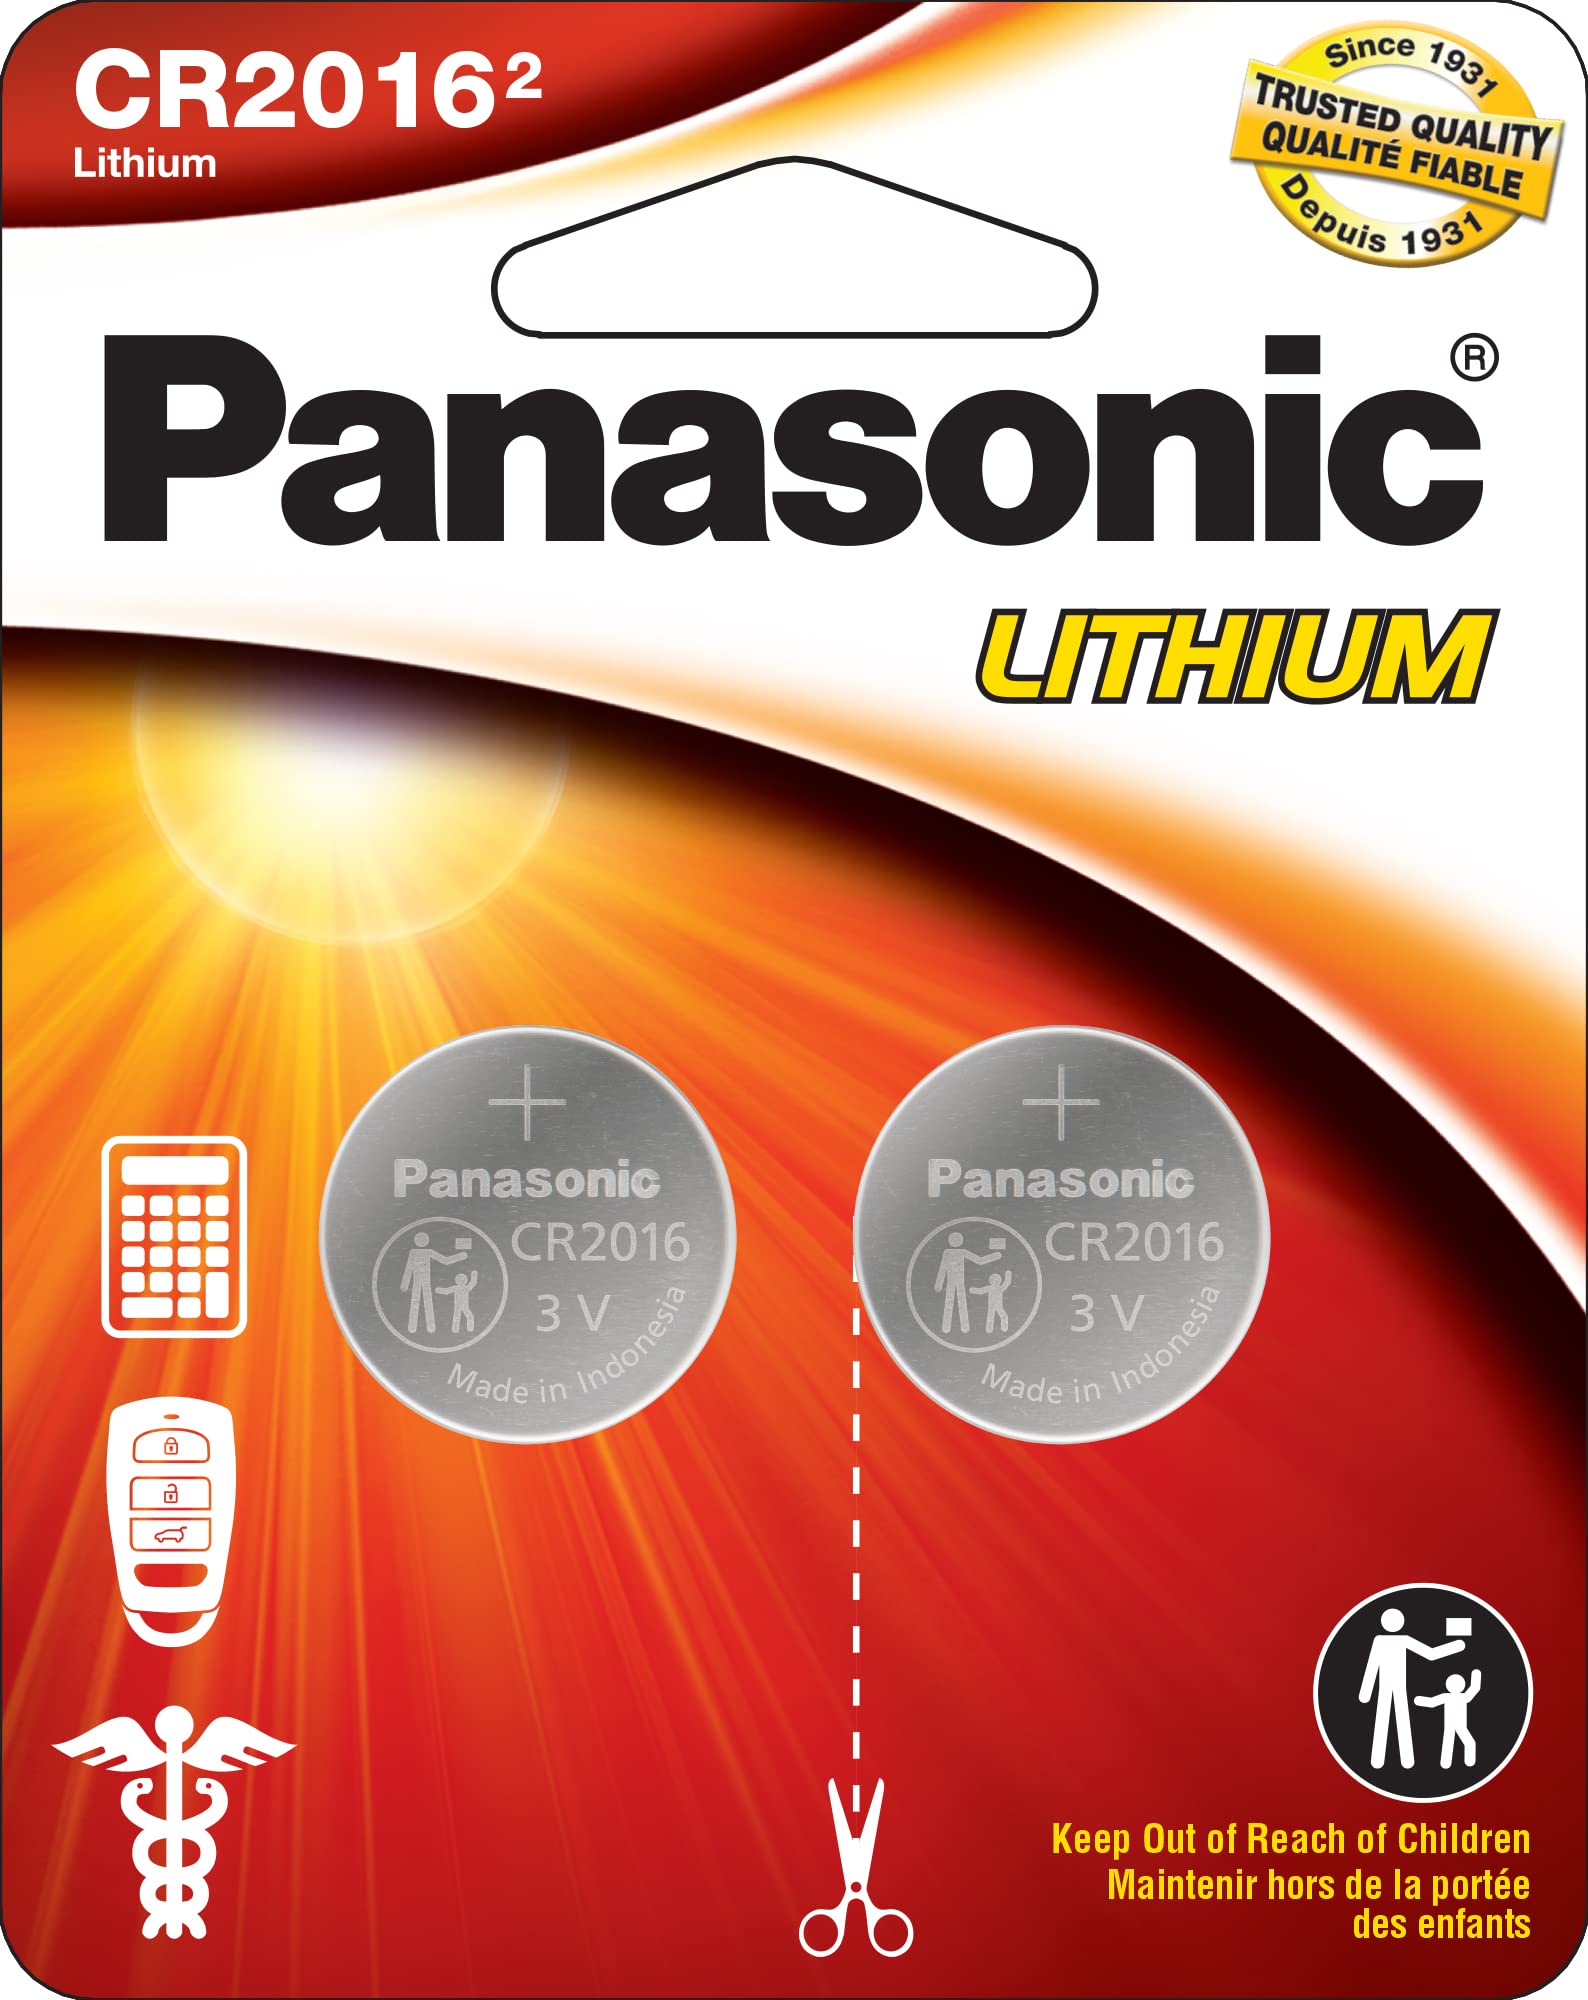 Panasonic CR2016 3.0 Volt Long Lasting Lithium Coin Cell Batteries in Child Resistant, Standards Based Packaging, 2-Battery Pack